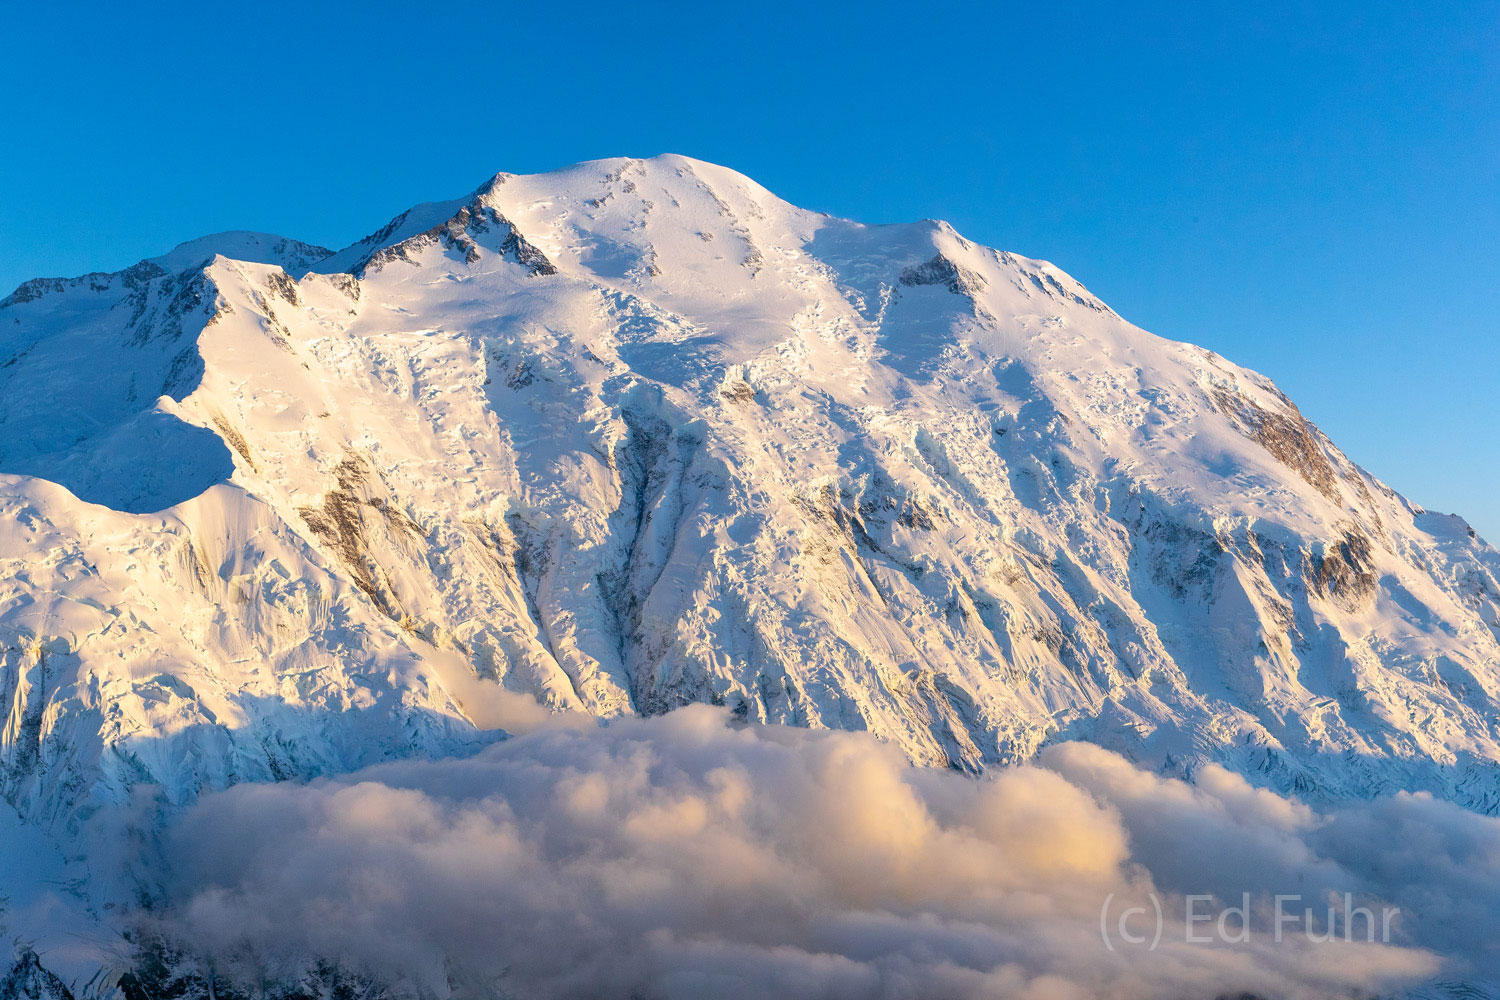 Late afternoon sun on Mount Denali